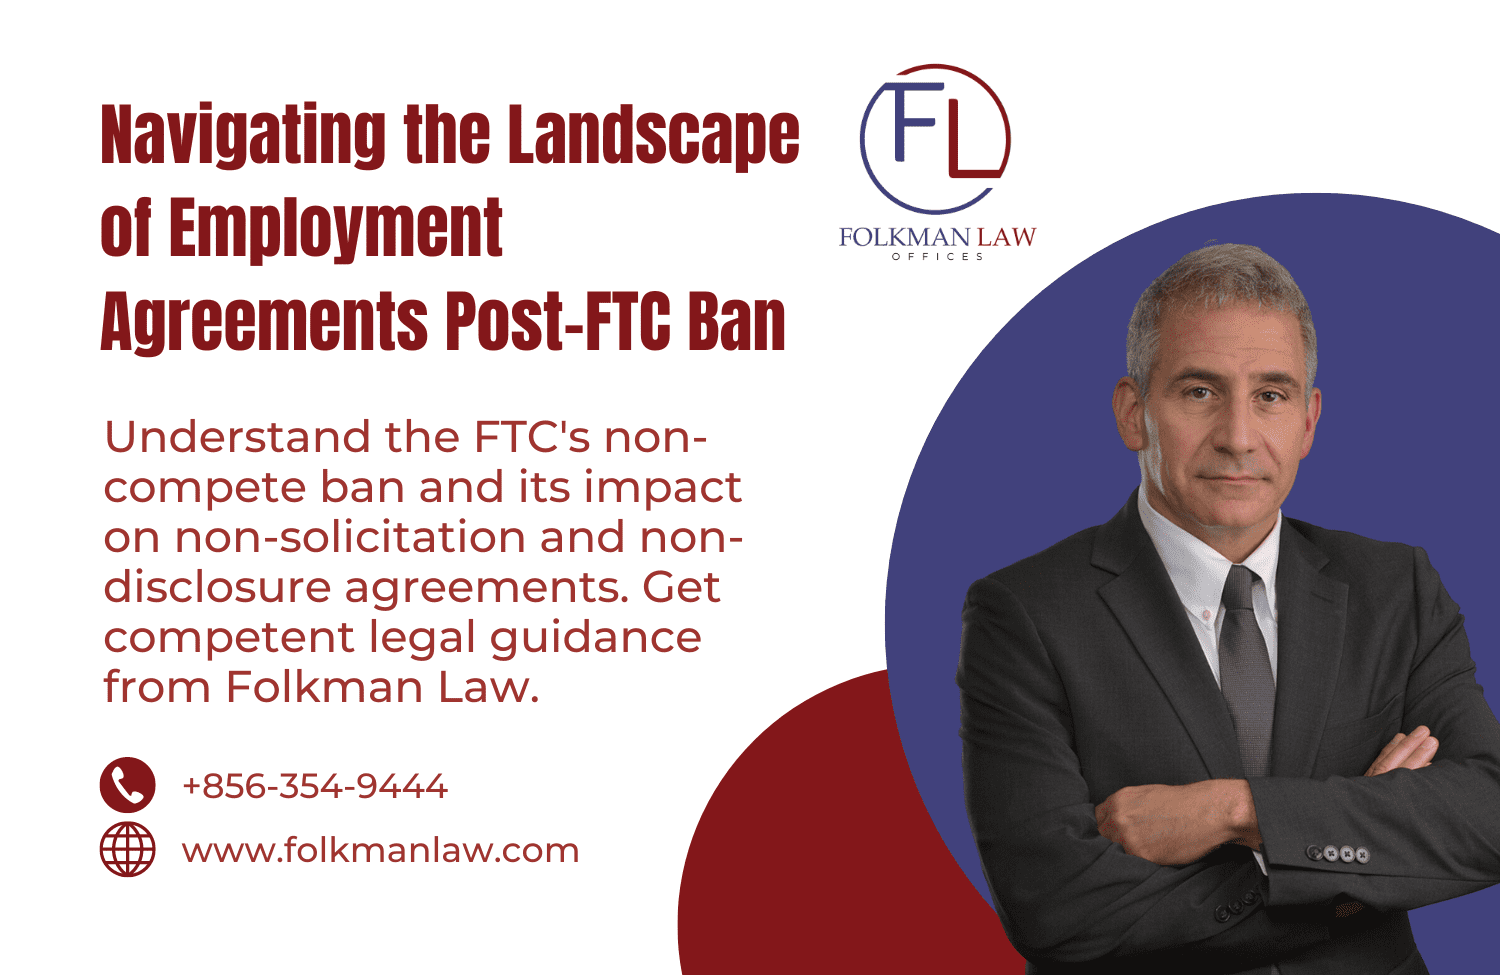 Navigating the Landscape of Employment Agreements Post-FTC Ban